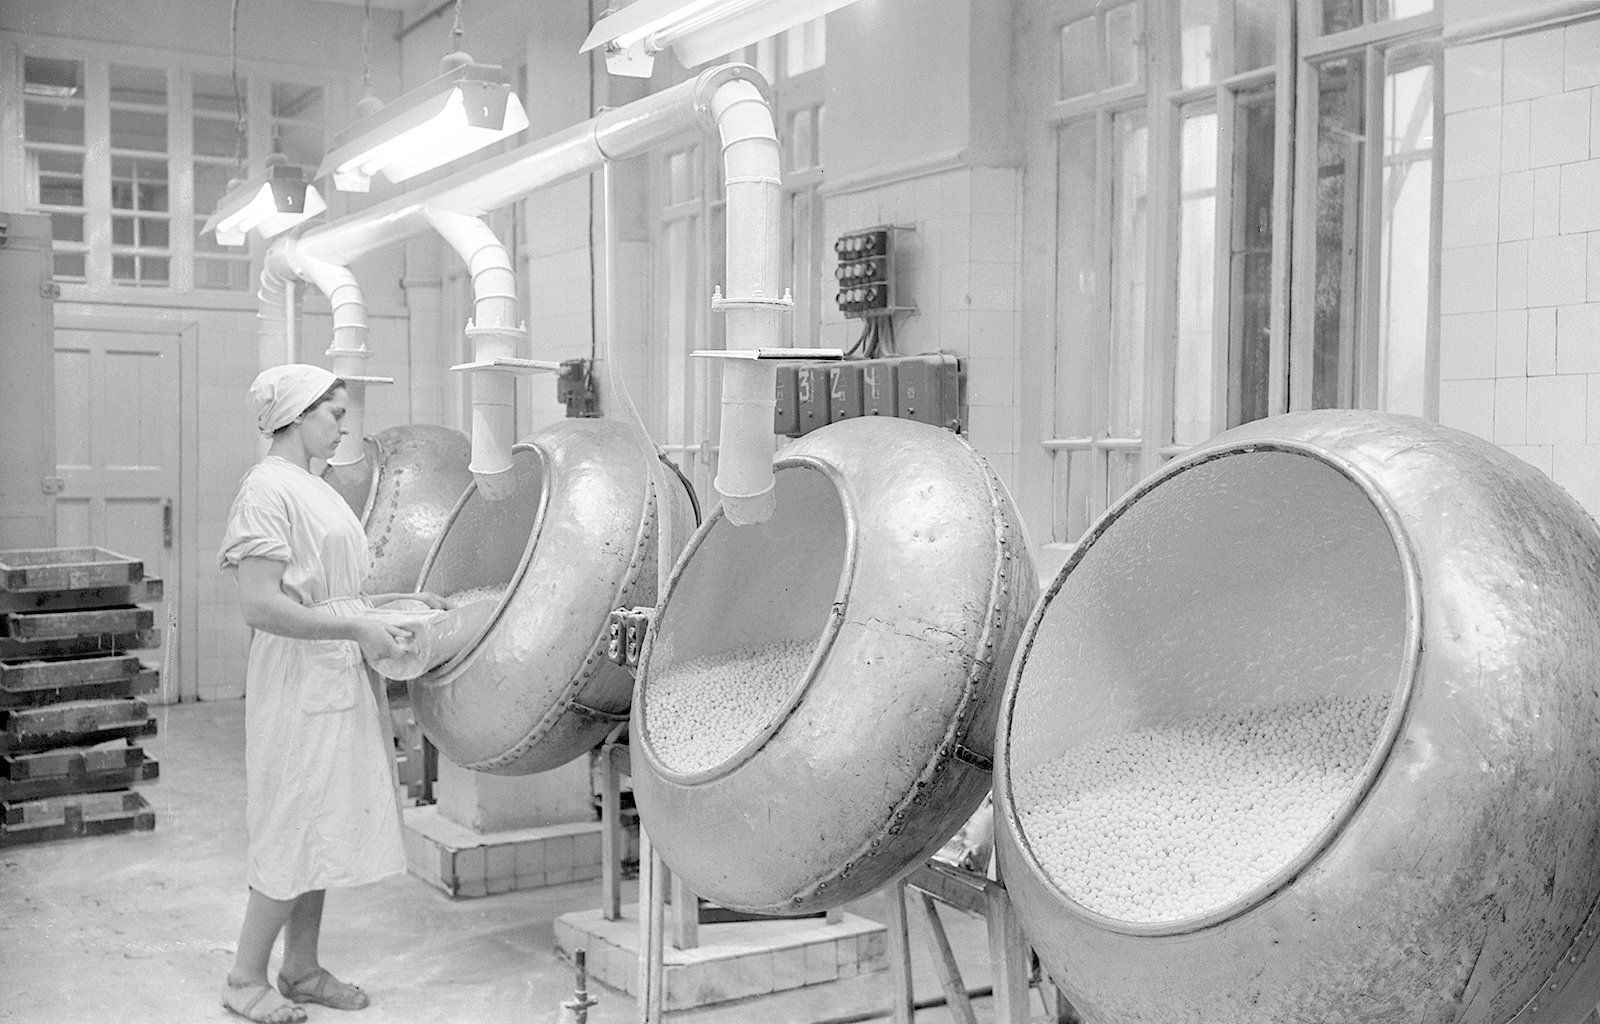 Production of polio vaccine pills at the Marat Confectionery Factory. Photo by B. Trepetov, V. Shadrin. 16 January 1962. Main Archive Department of Moscow